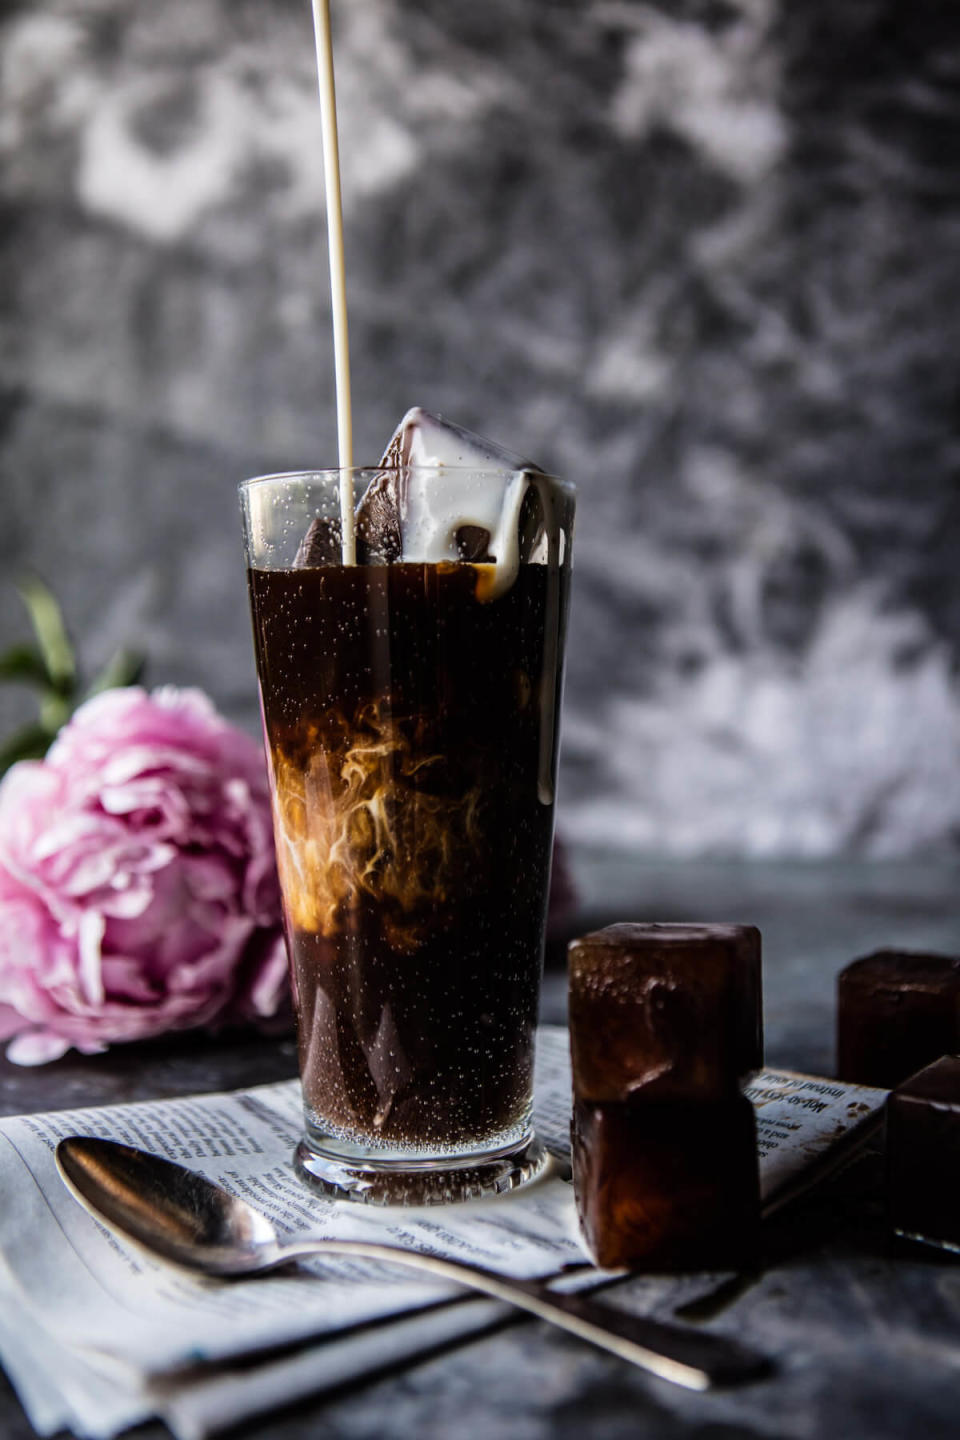 <strong>Get the <a href="https://www.halfbakedharvest.com/perfect-vanilla-bean-iced-coffee/" target="_blank">Perfect Vanilla Bean Iced Coffee recipe</a> from Half Baked Harvest</strong>